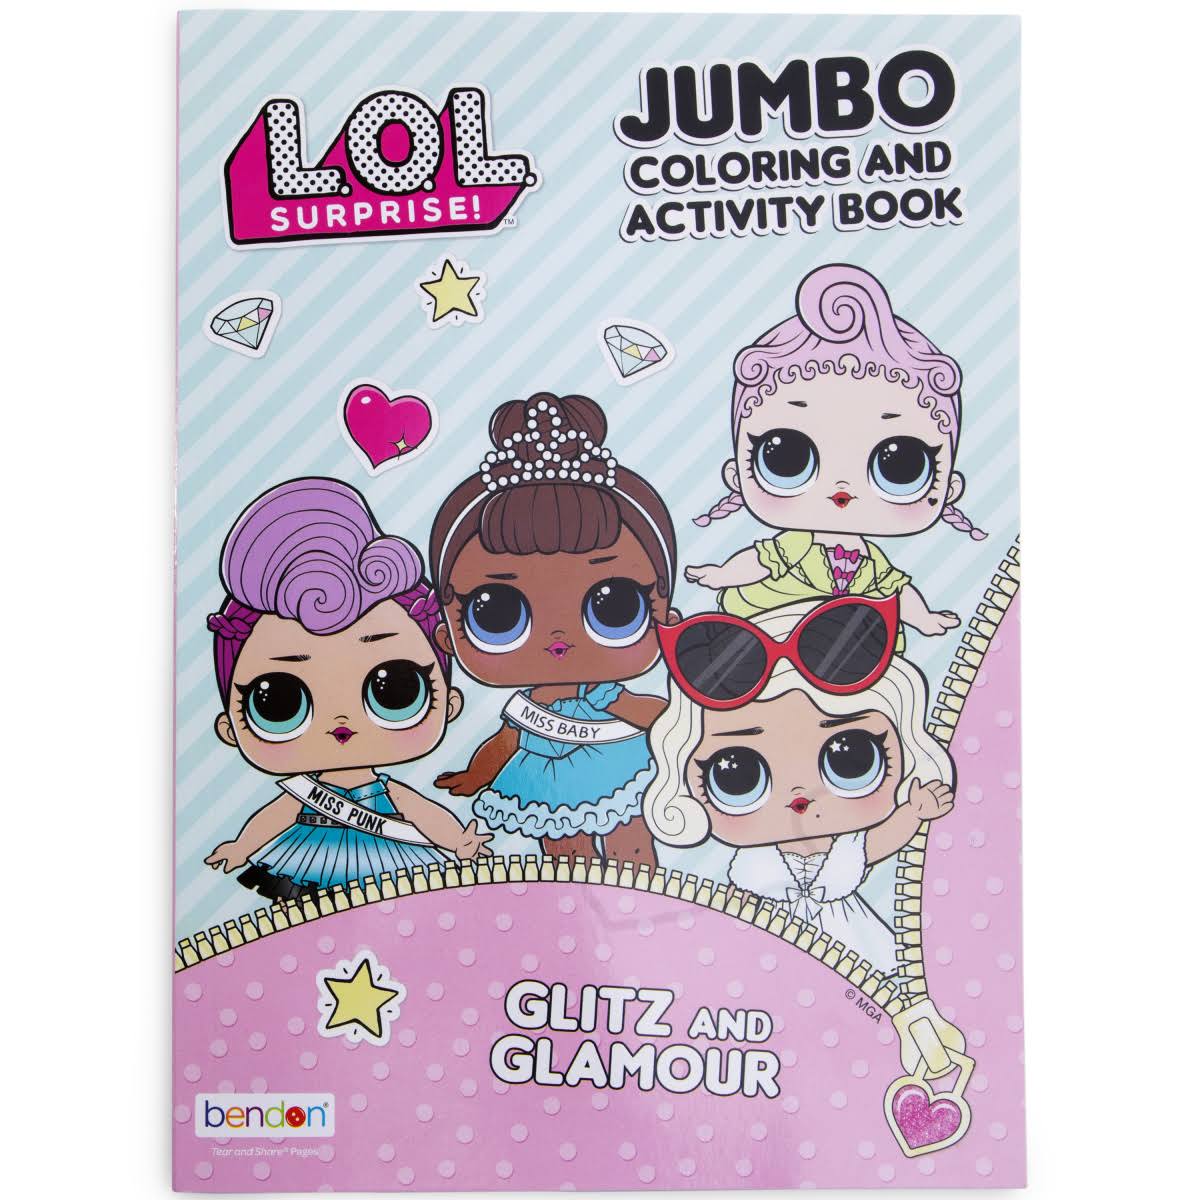 L.O.L Surprise! Jumbo Coloring and Activity Book - Glitz and Glamour